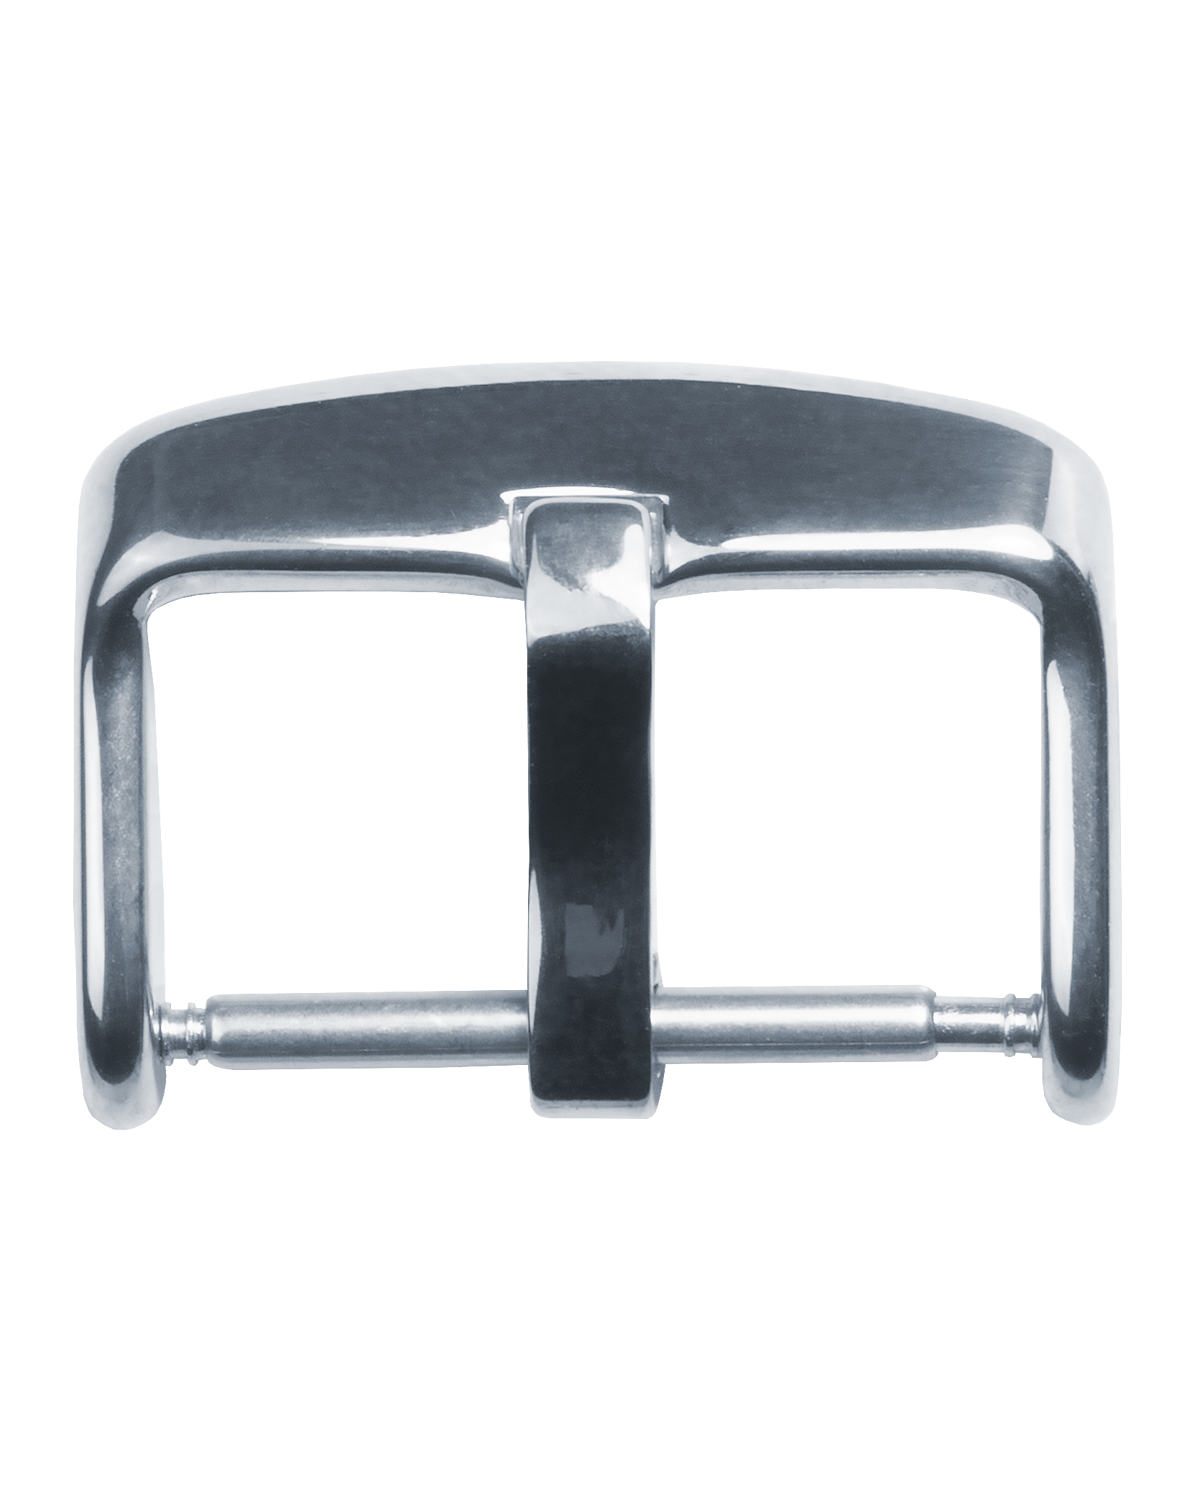 Pin buckle with wide pin